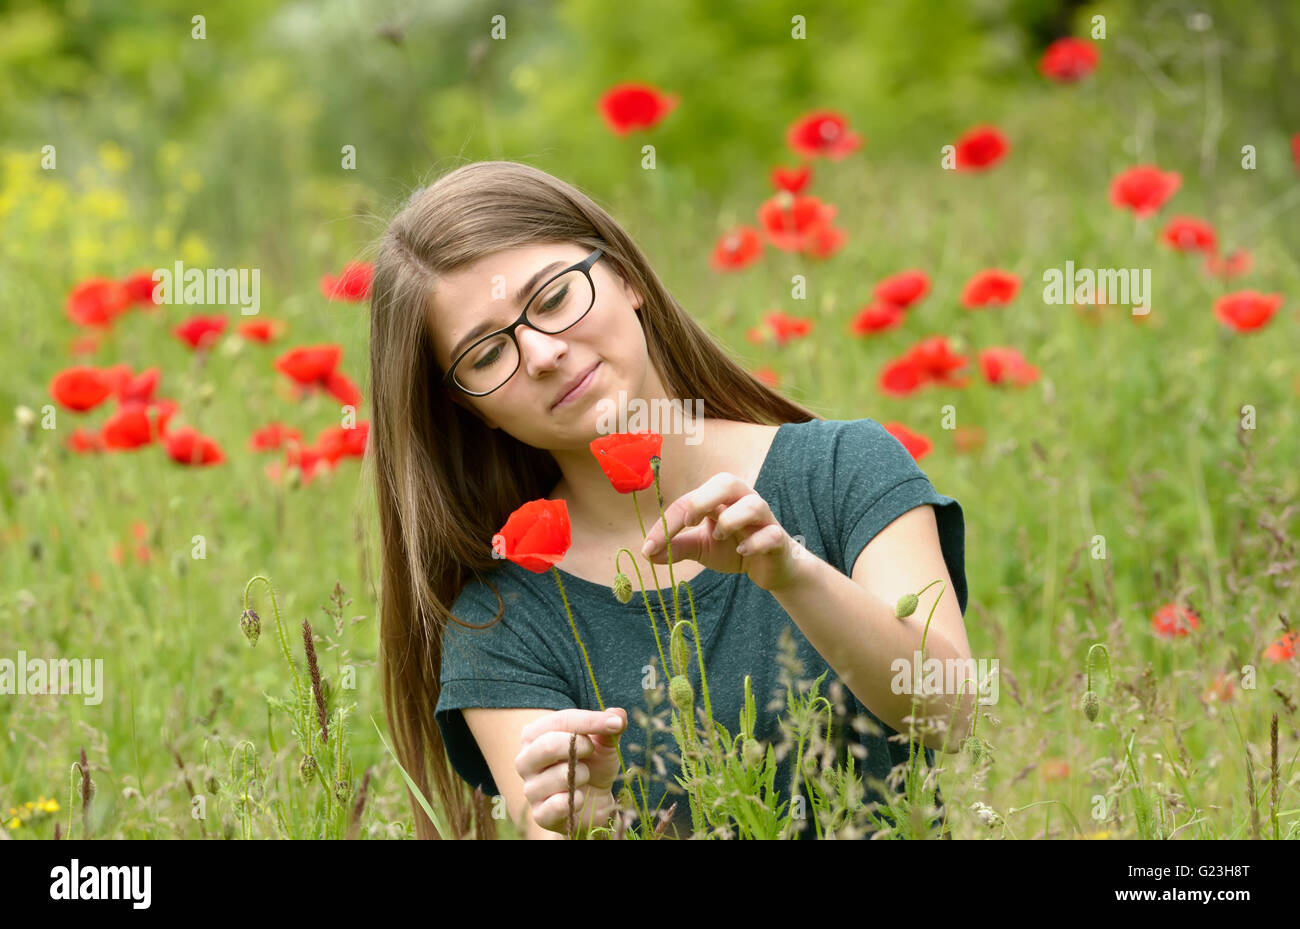 Portrait of young girl in a poppy field Stock Photo